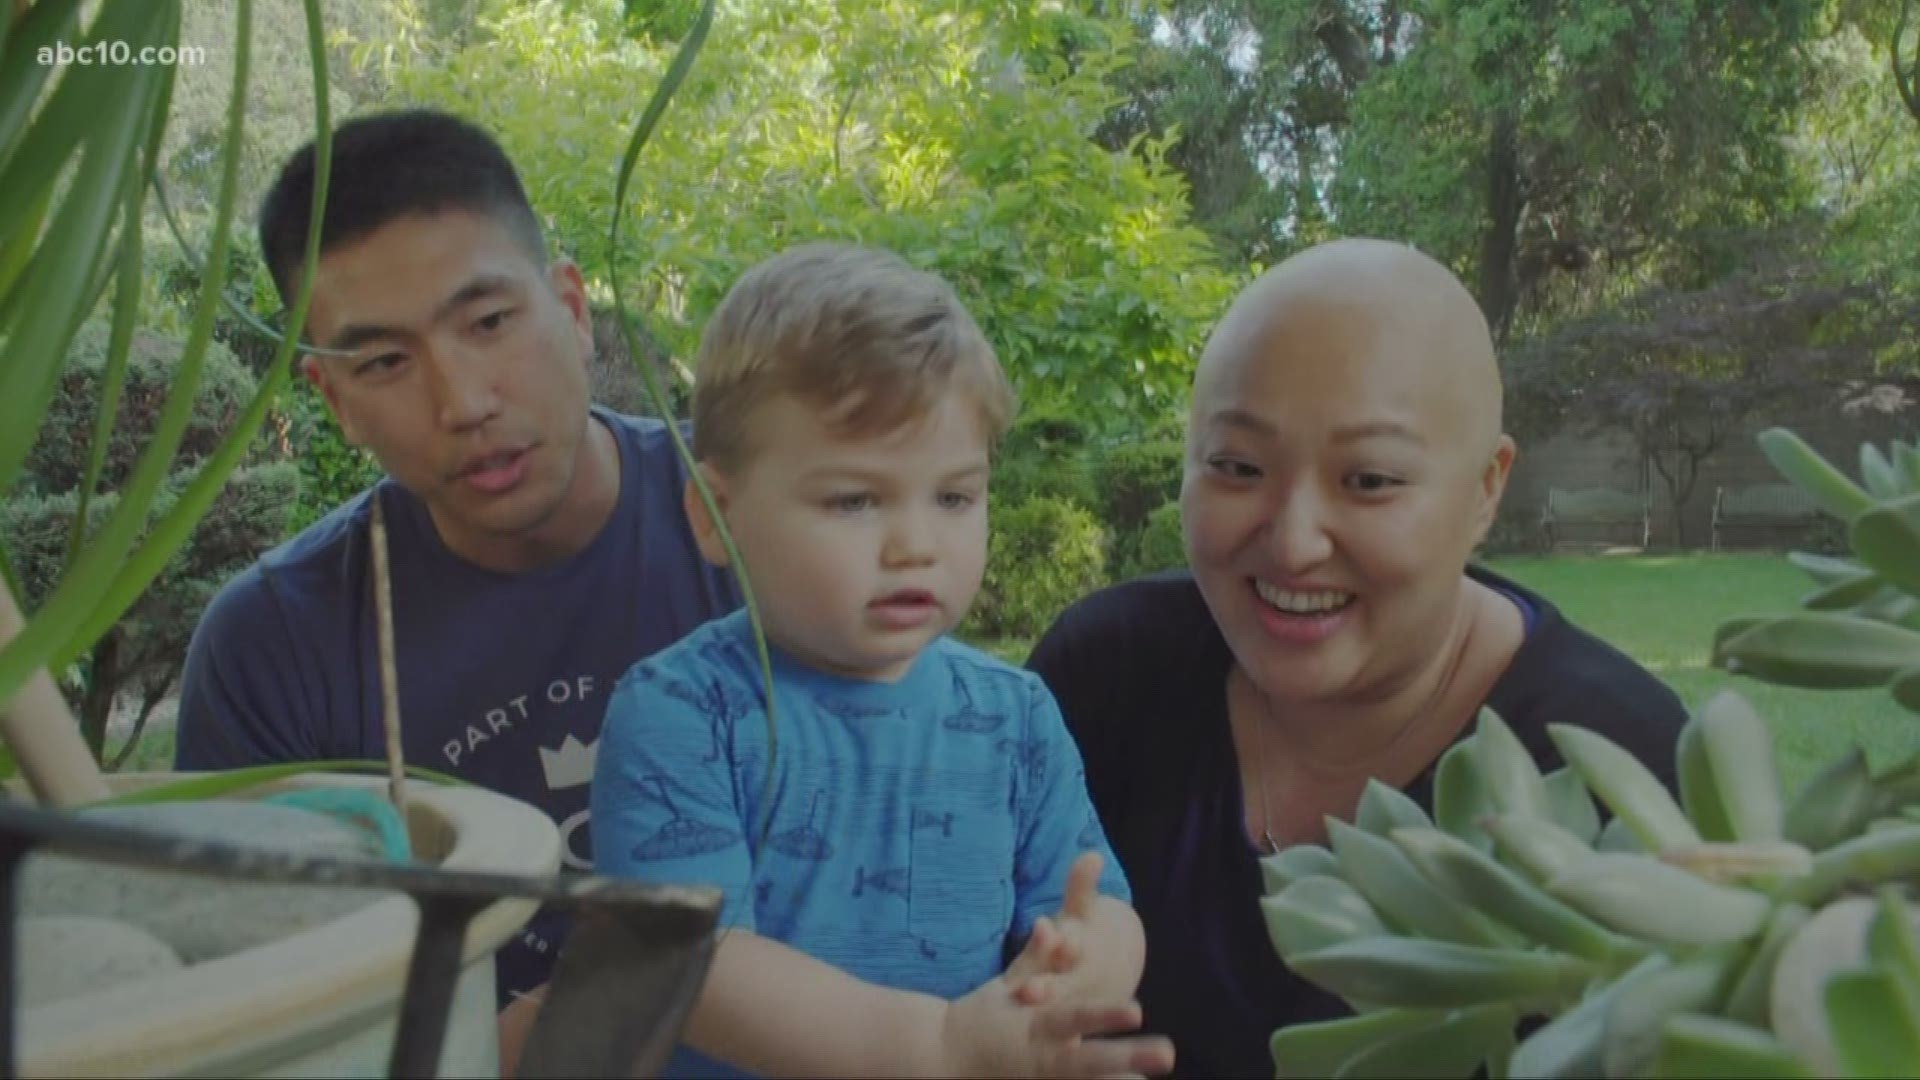 Estella Kim was diagnosed with a rare form of cancer in March. She needs a bone marrow donor of Korean descent. To register as a potential donor for Estella go to https://join.bethematch.org/EstellasJourney or text ESTELLA to 61474.